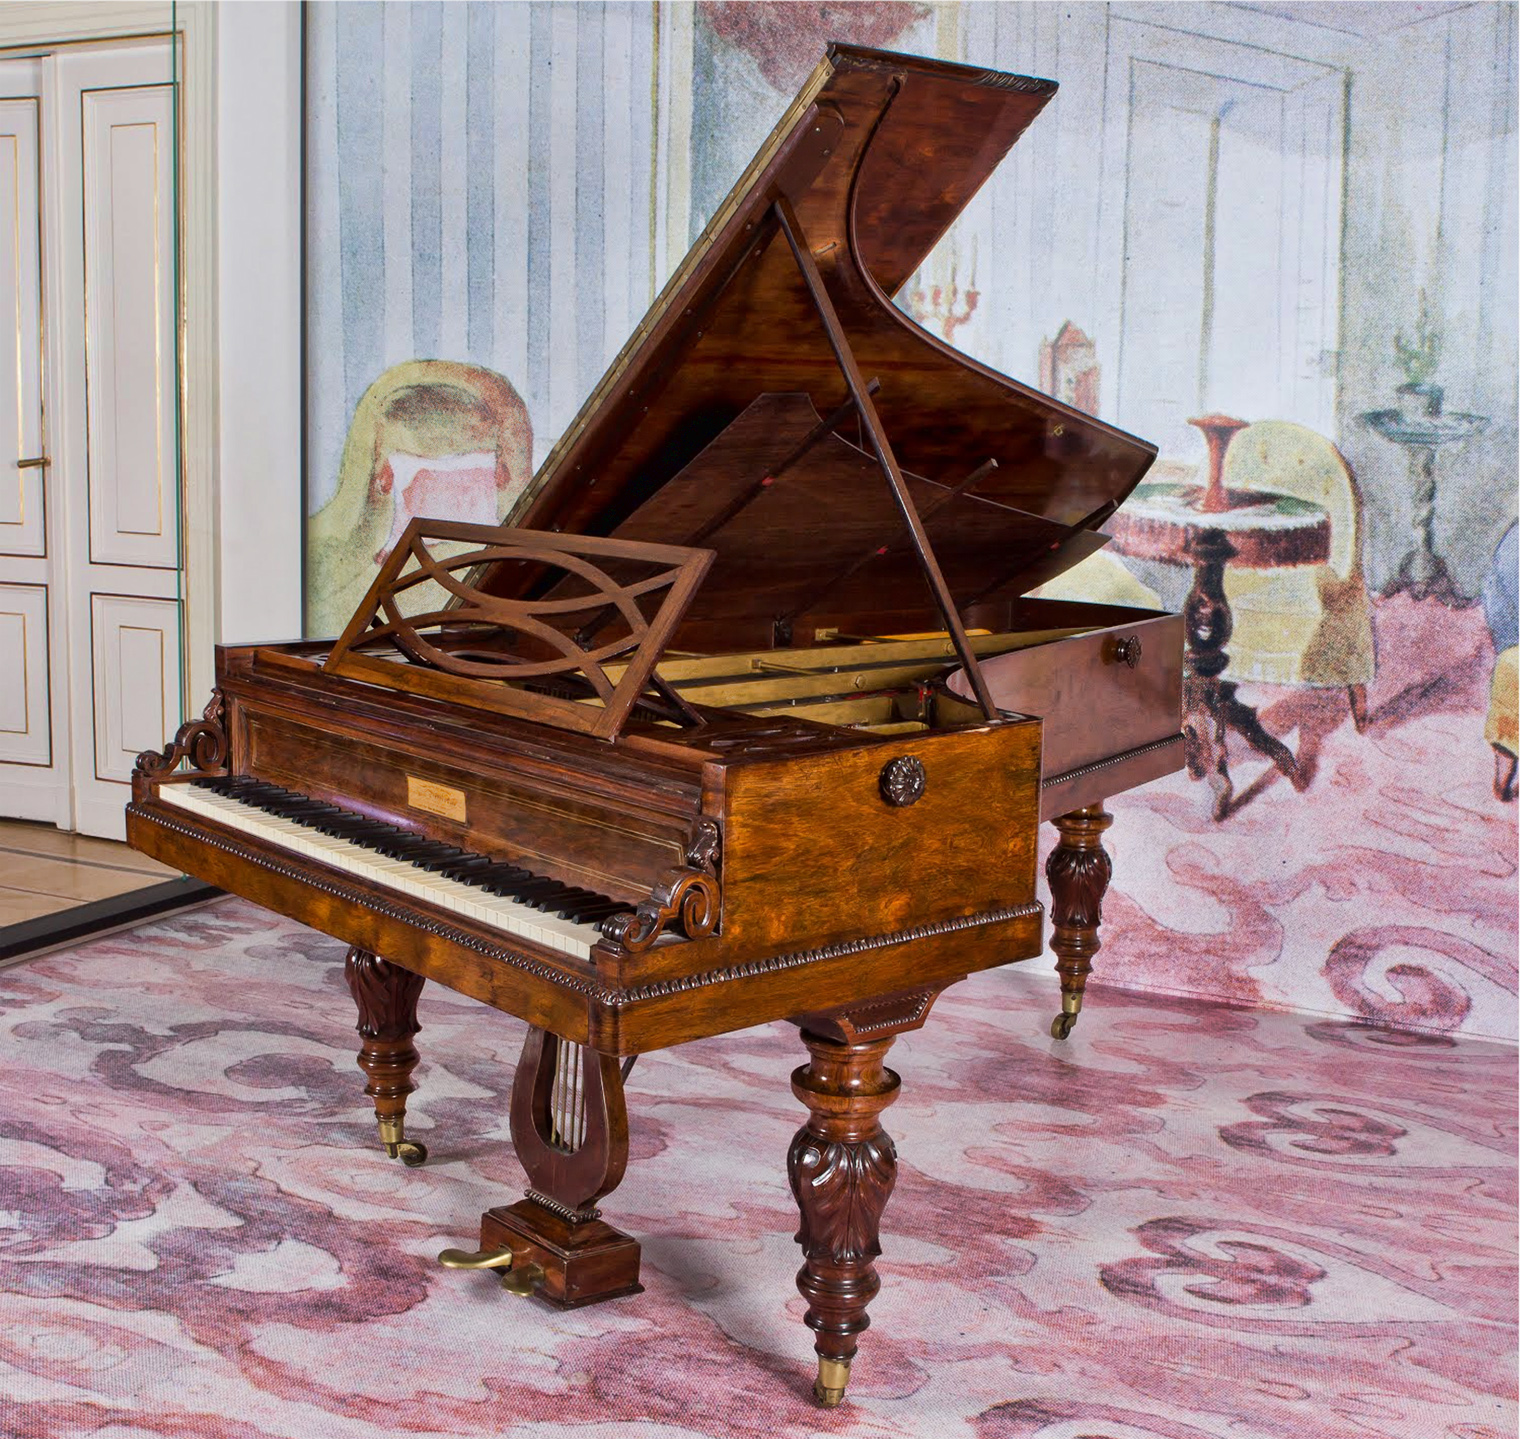 Chopin's Piano | Pleyel piano, serial number 14810, made in 1848 | Fryderyk Chopin Institute